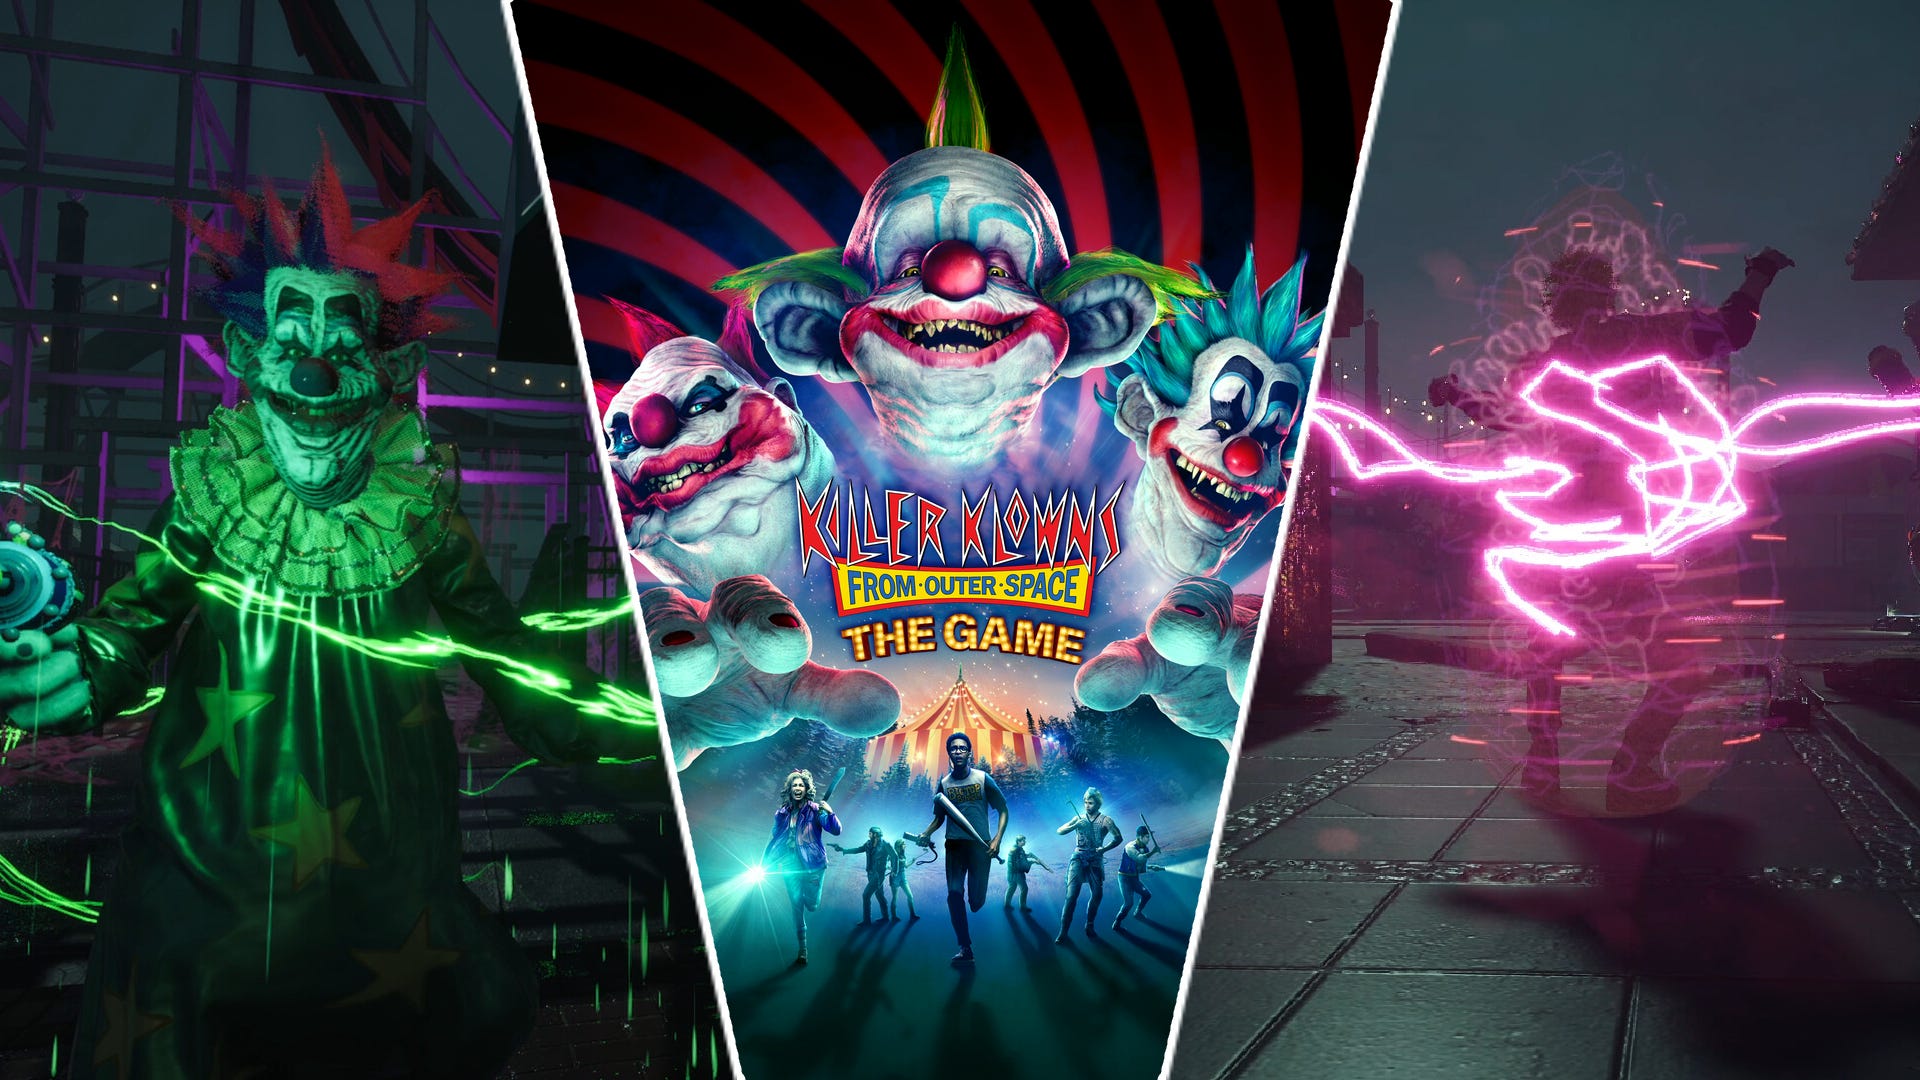 Killer Klowns from Outer Space: The Game is as absurd as you’d expect, for all the right reasons